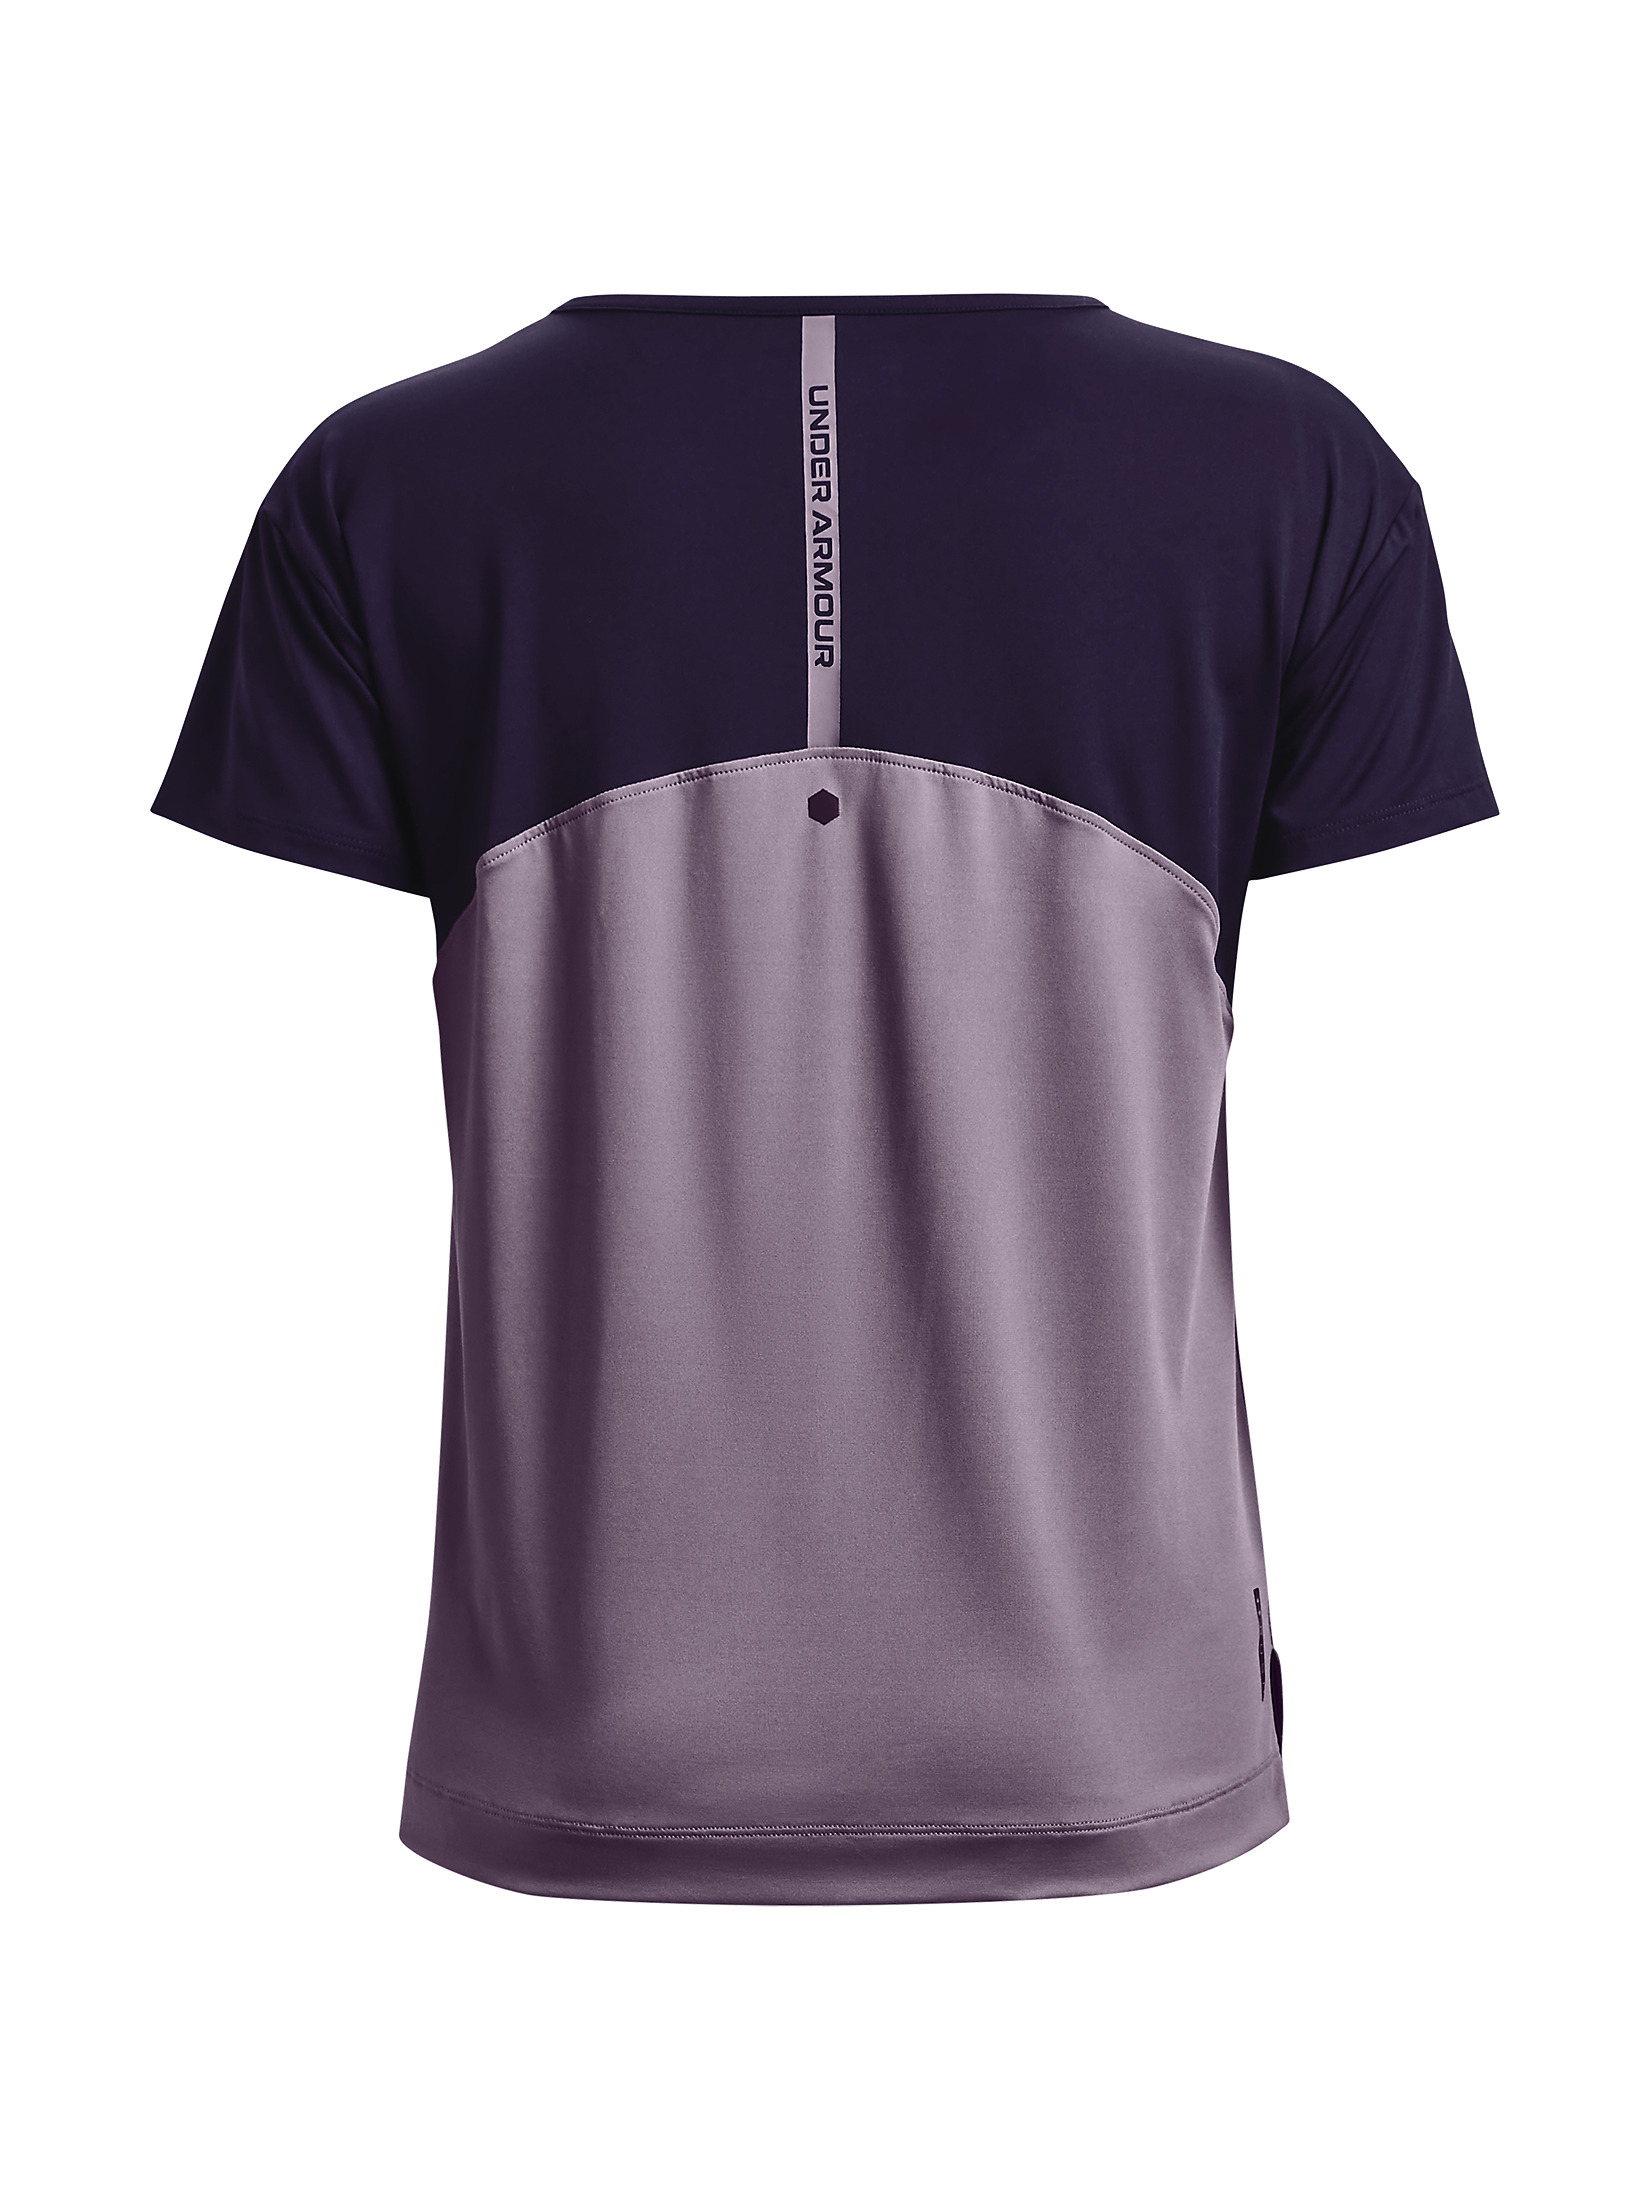 - CONTRAER - Funktionsshirt RUSH in Lila, Aubergine 